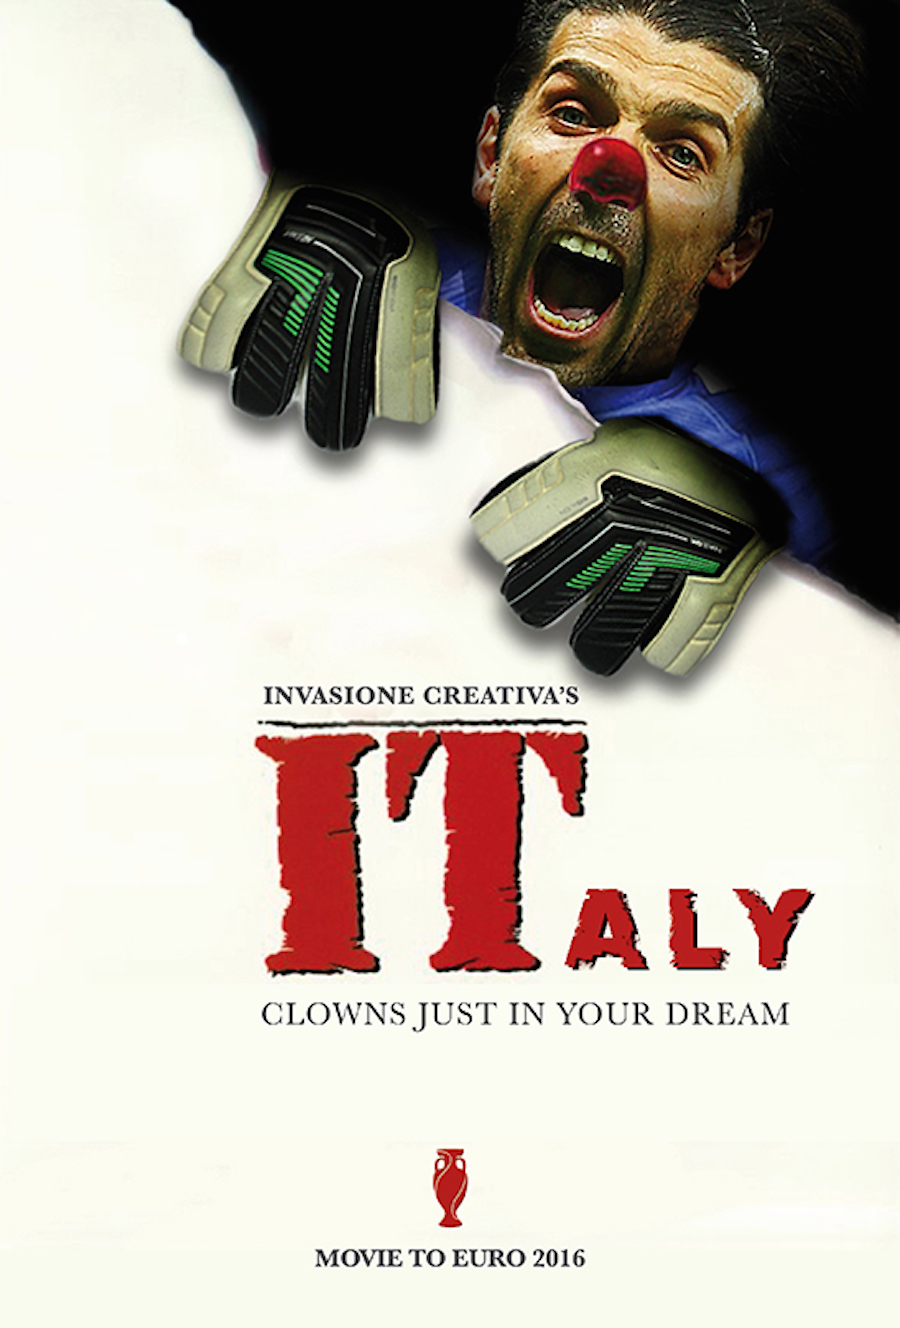 Movie Posters Revisited with Euro 2016 Teams5